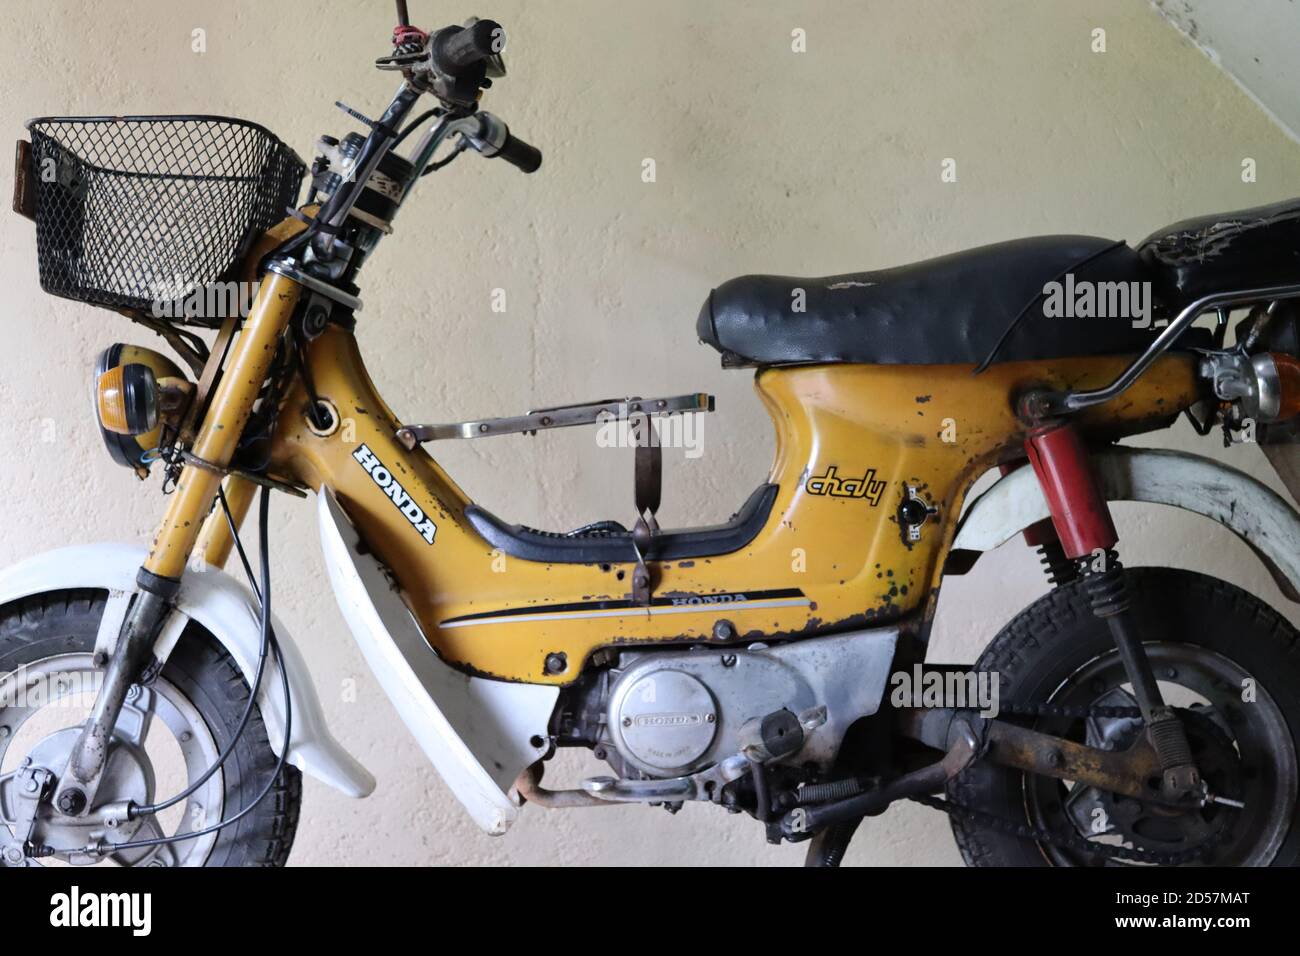 Under very good running condition and originally from Japan under Honda trade mark and model series as Chaly this motor bike made in 1984. Stock Photo